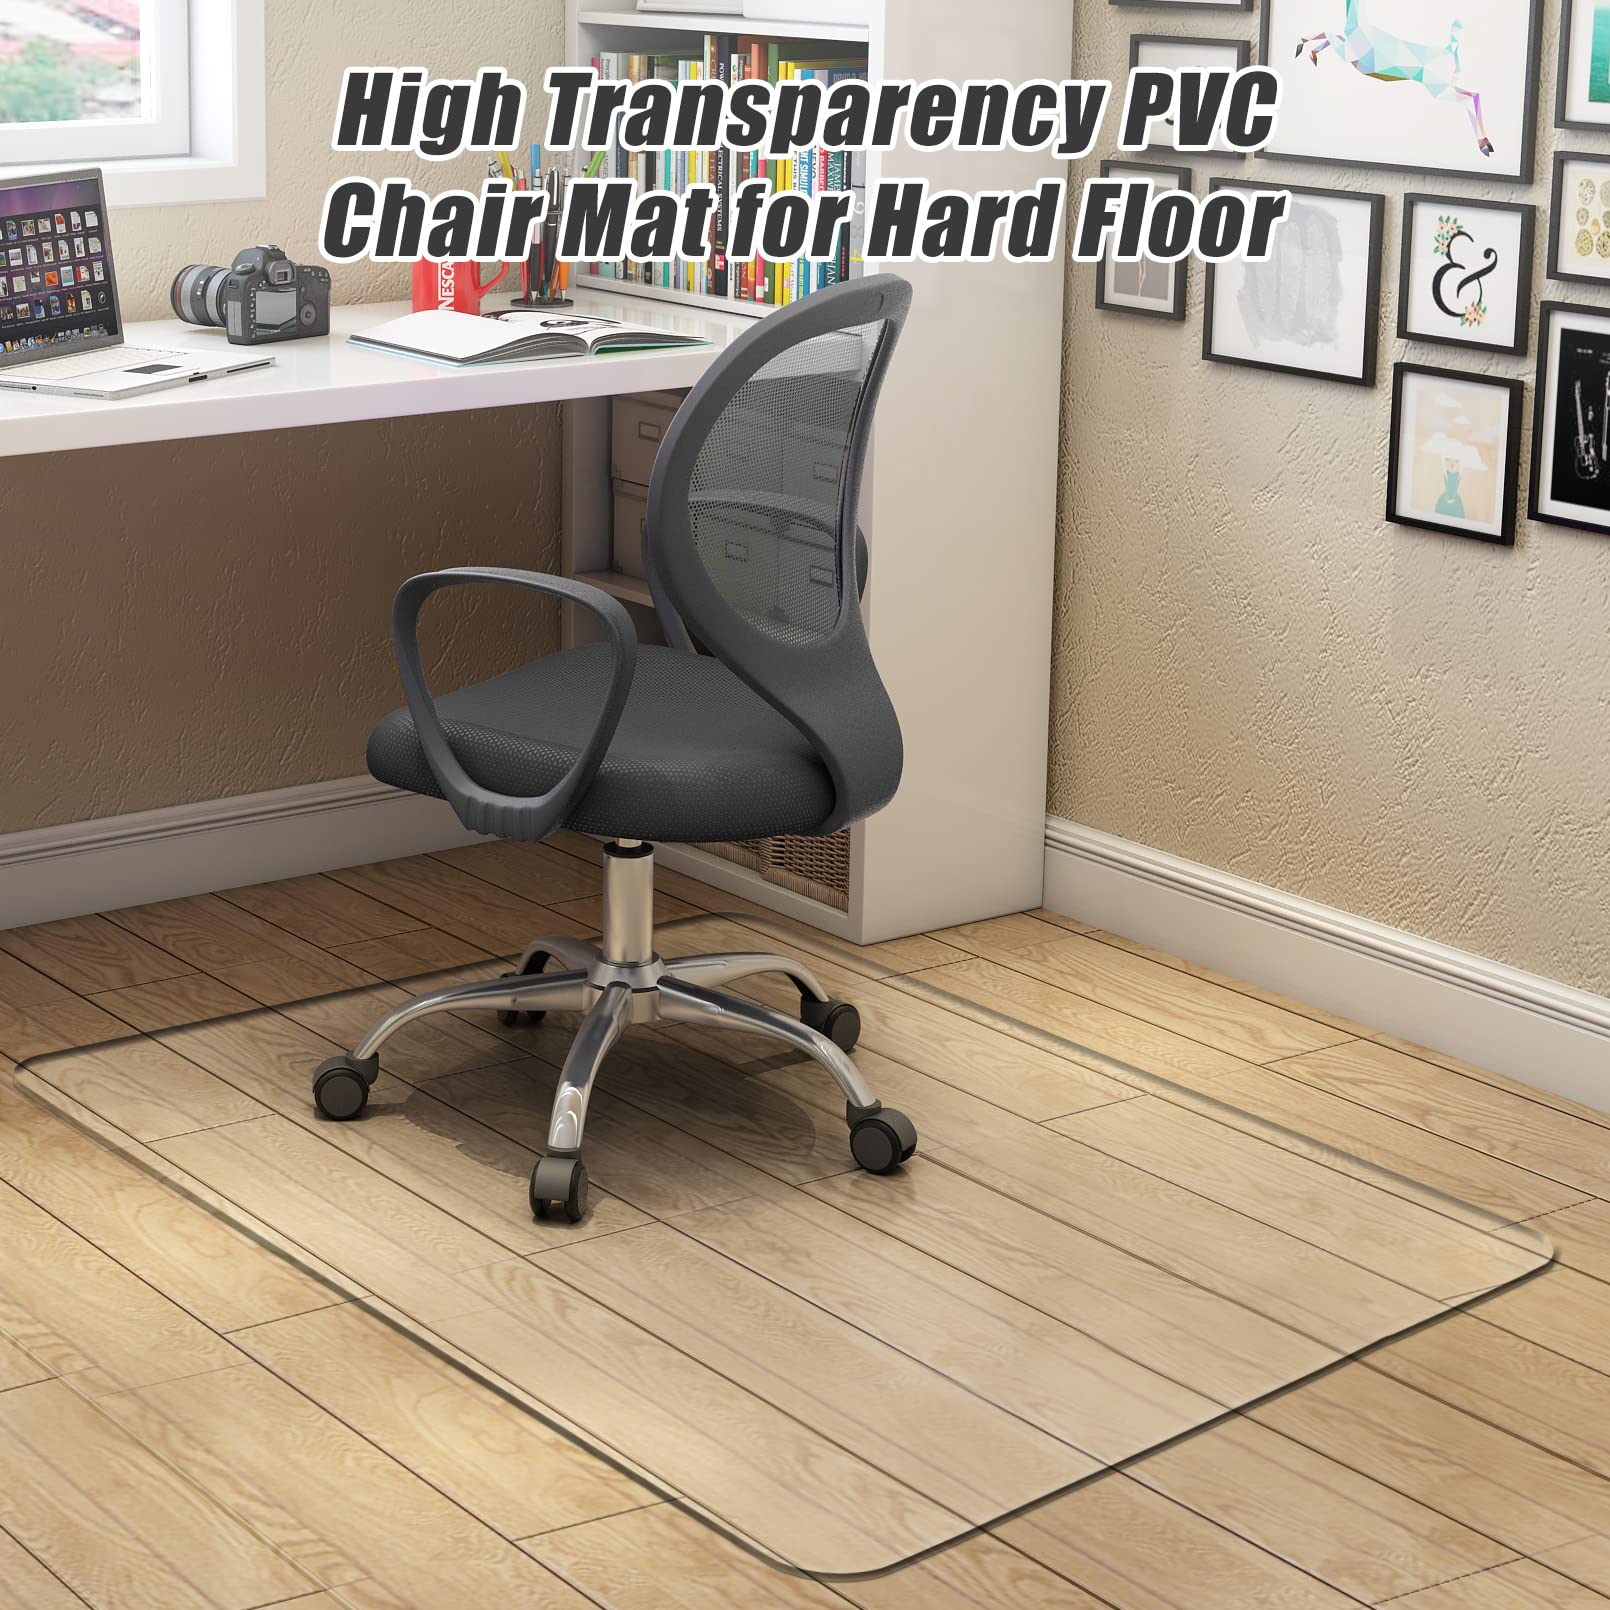 Nctoberows Clear Chair Mat for Hard Floor, 1/5" Thick 36" x 48" PVC Desk Chair Mat - Heavy Duty Floor Protector for Office & Home, Easy to Clean